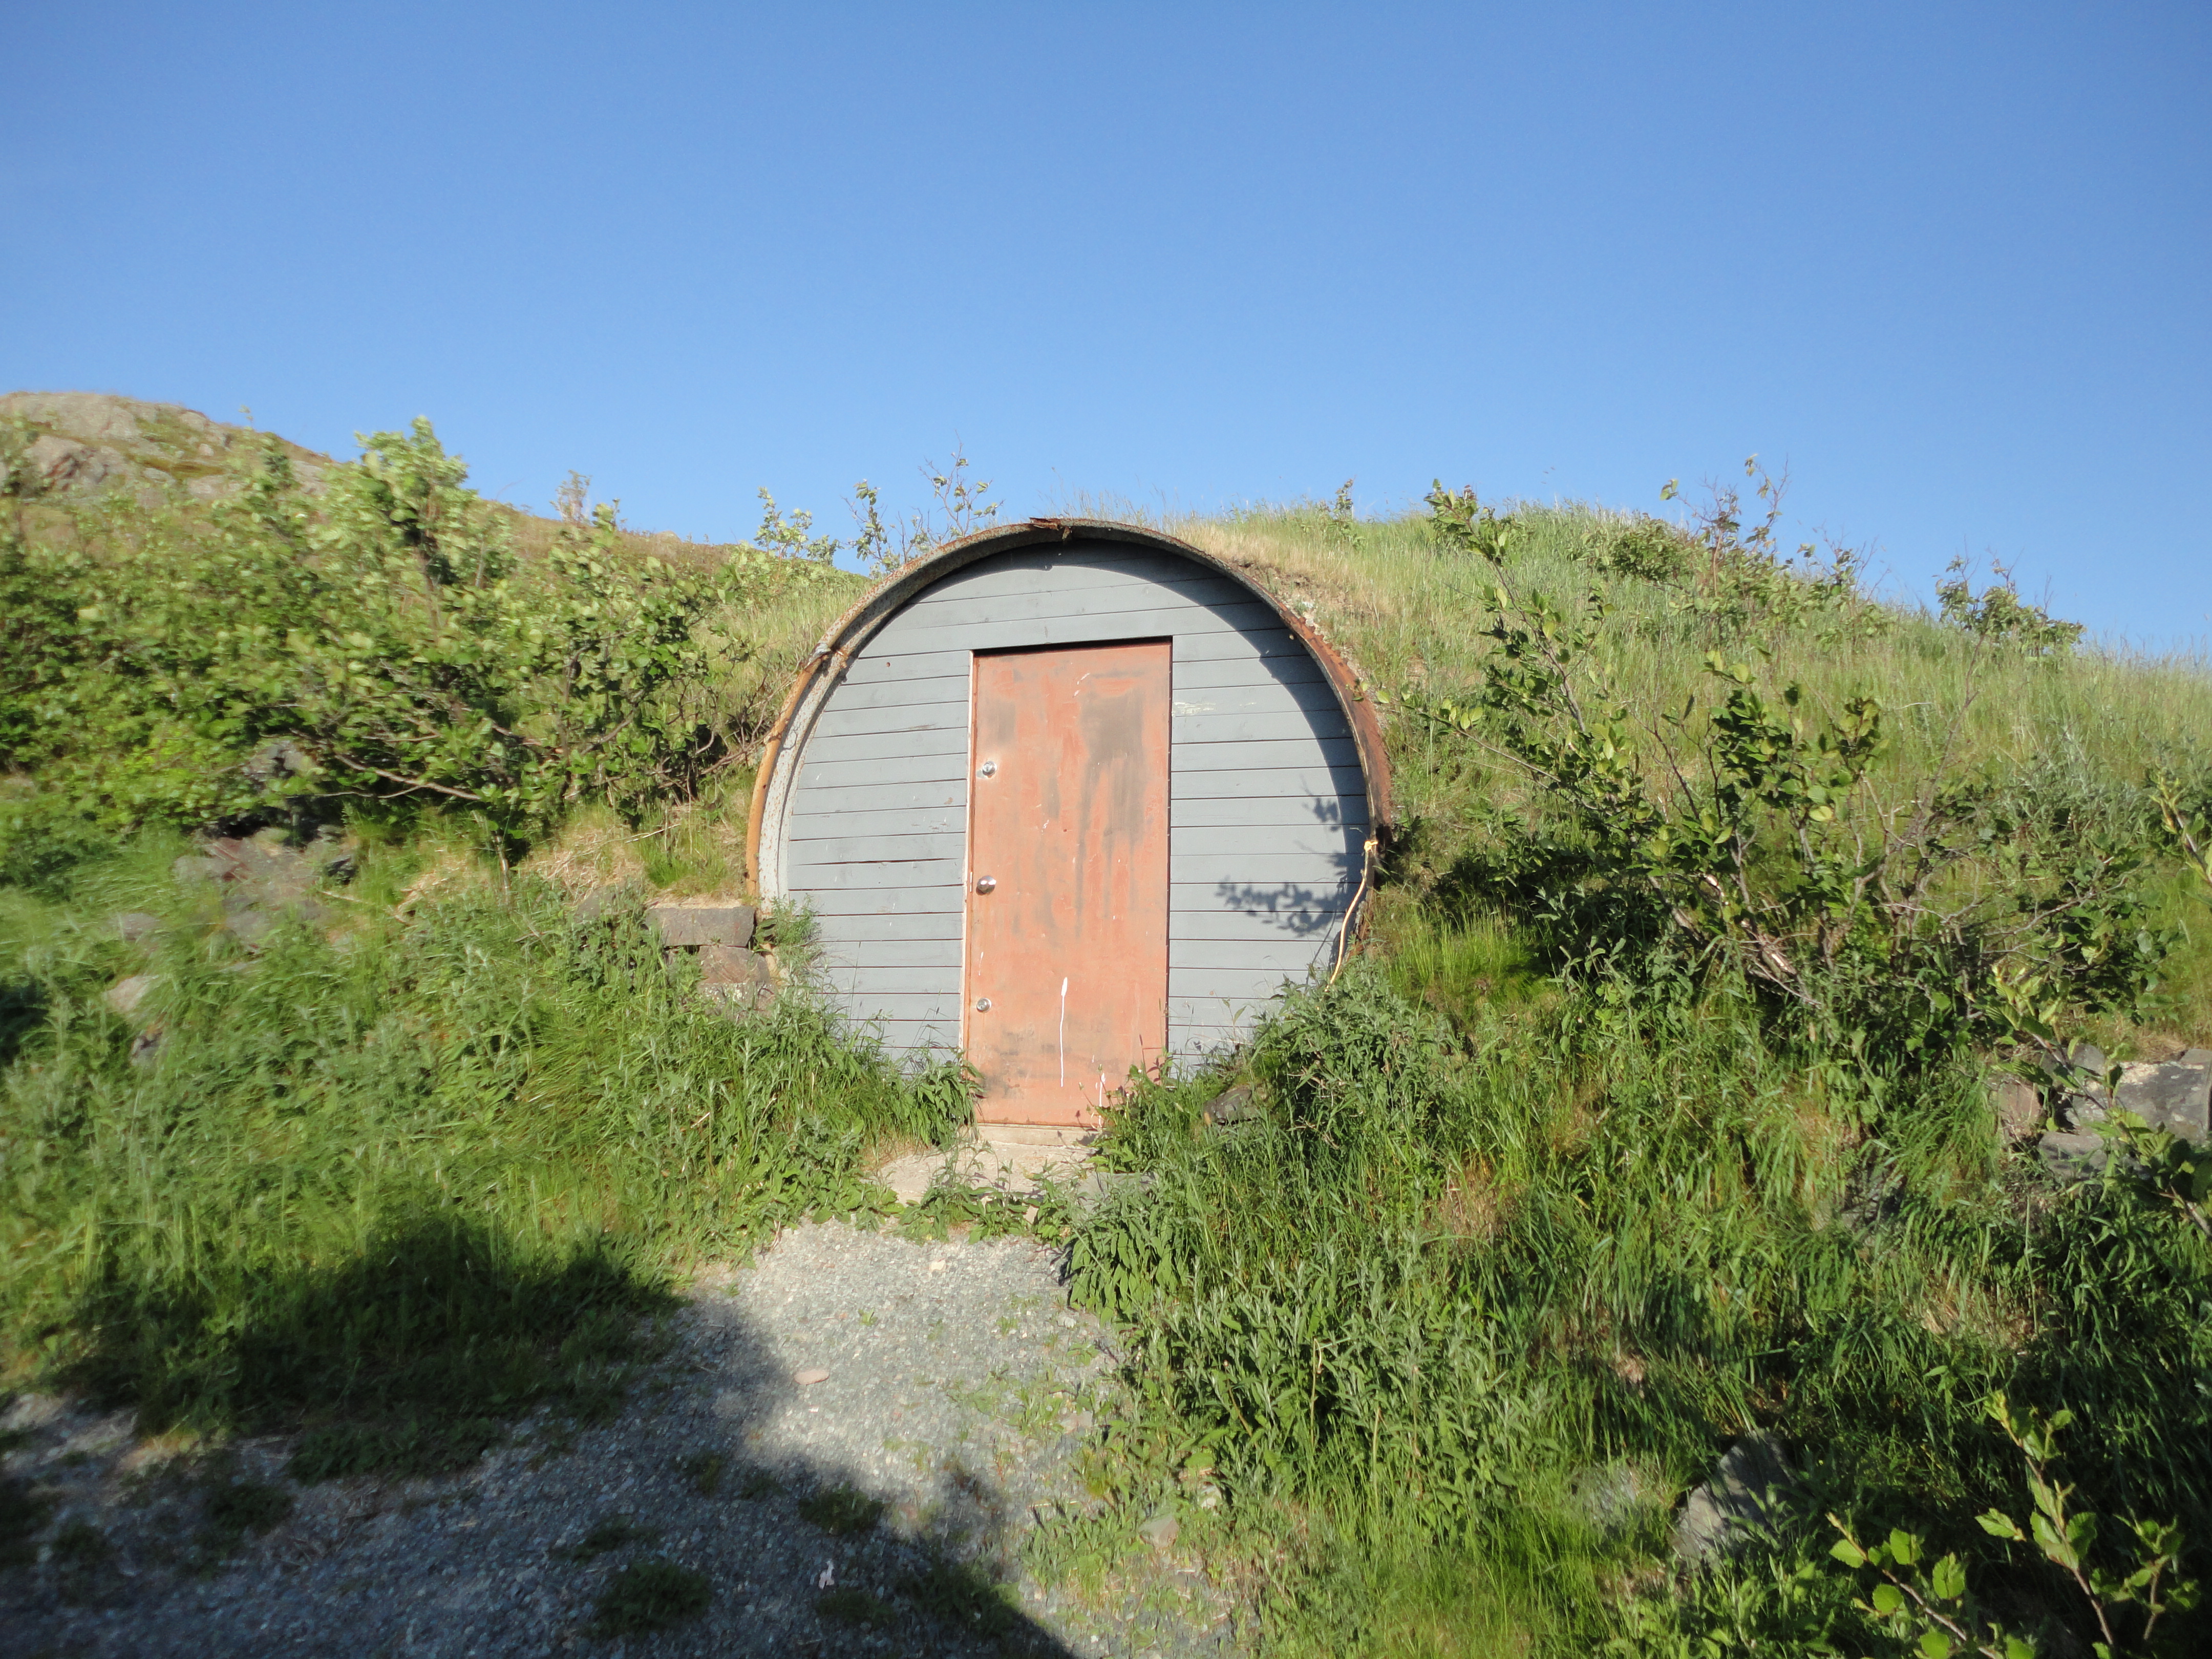 Quonset hut built by US Army near George’s Pond